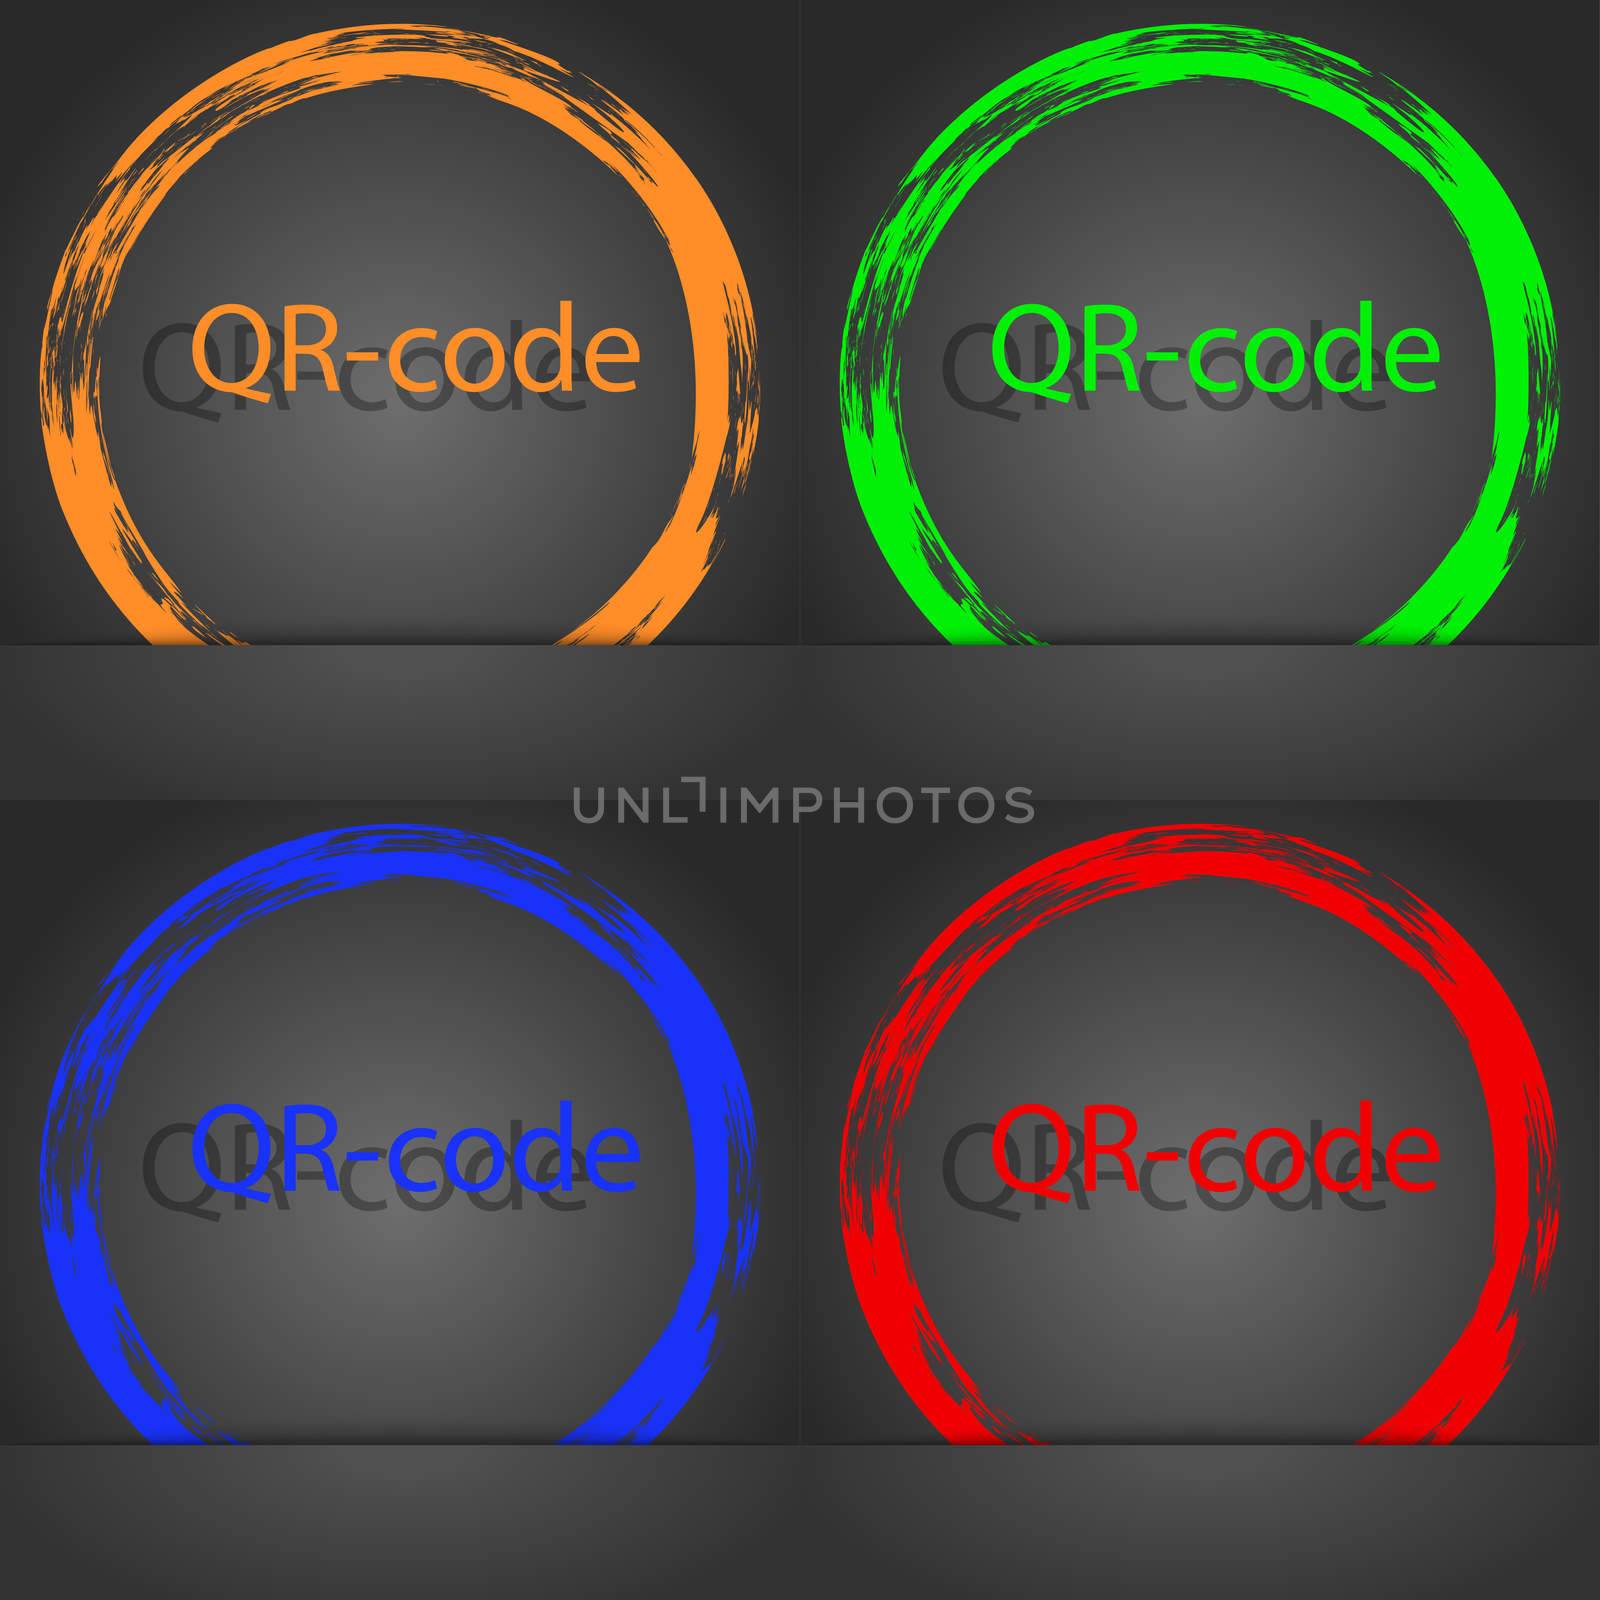 Qr code sign icon. Scan code symbol. Fashionable modern style. In the orange, green, blue, red design. illustration